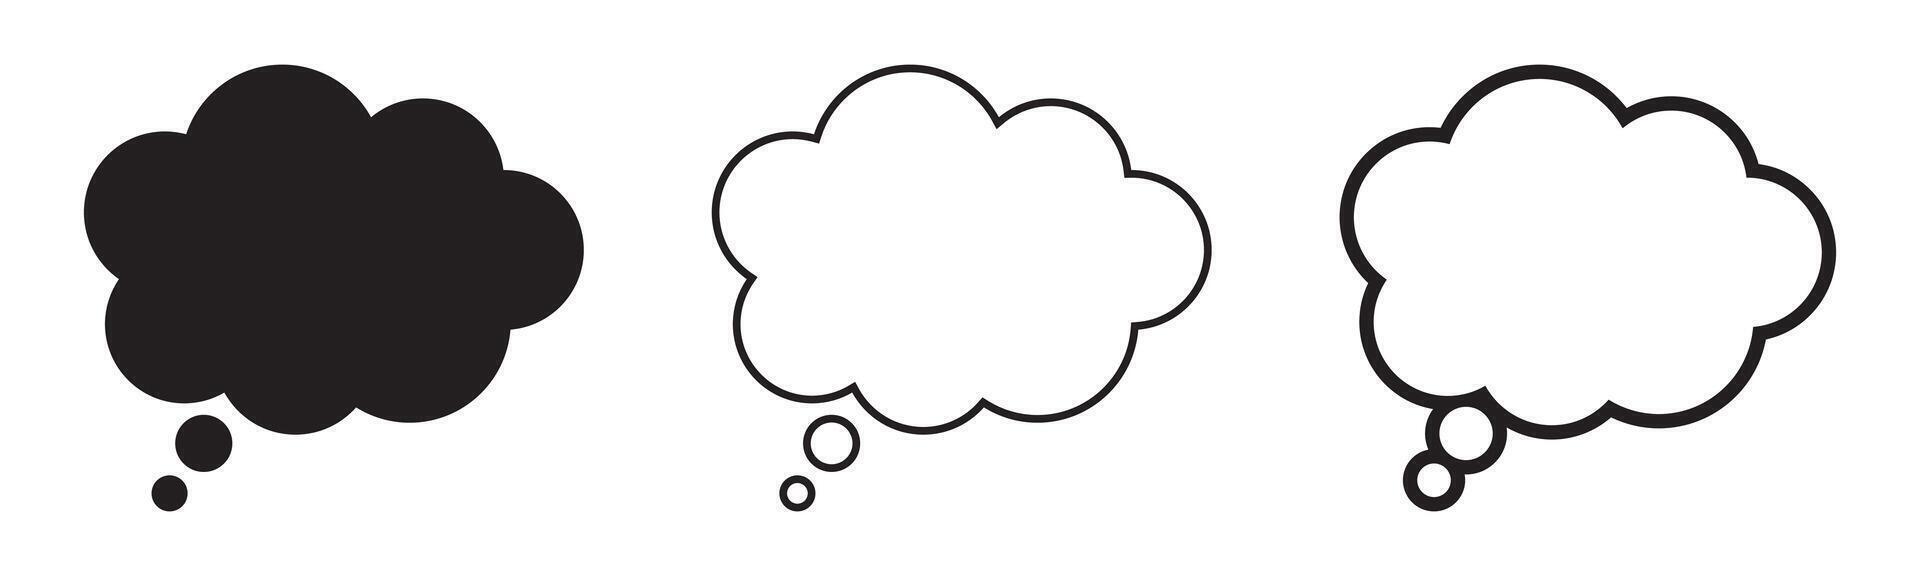 Thought bubble icon, thinking cloud icon for apps and websites. Set of speech bubbles. Speak bubble text, cartoon chatting box, message box. vector